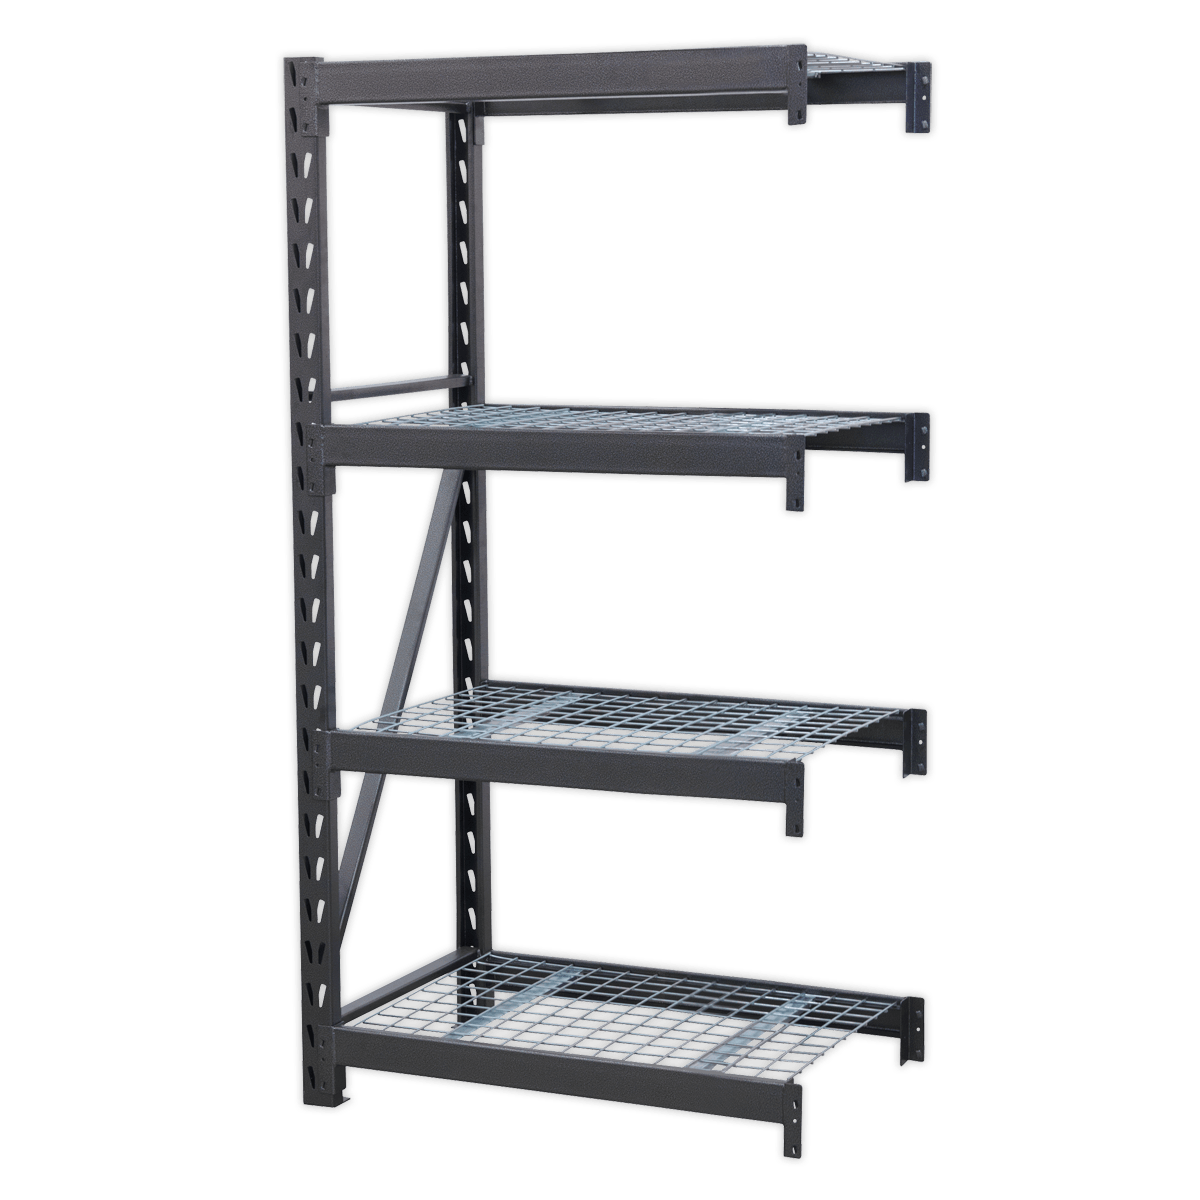 Sealey Heavy-Duty Racking Extension Pack with 4 Mesh Shelves 640kg Capacity Per Level